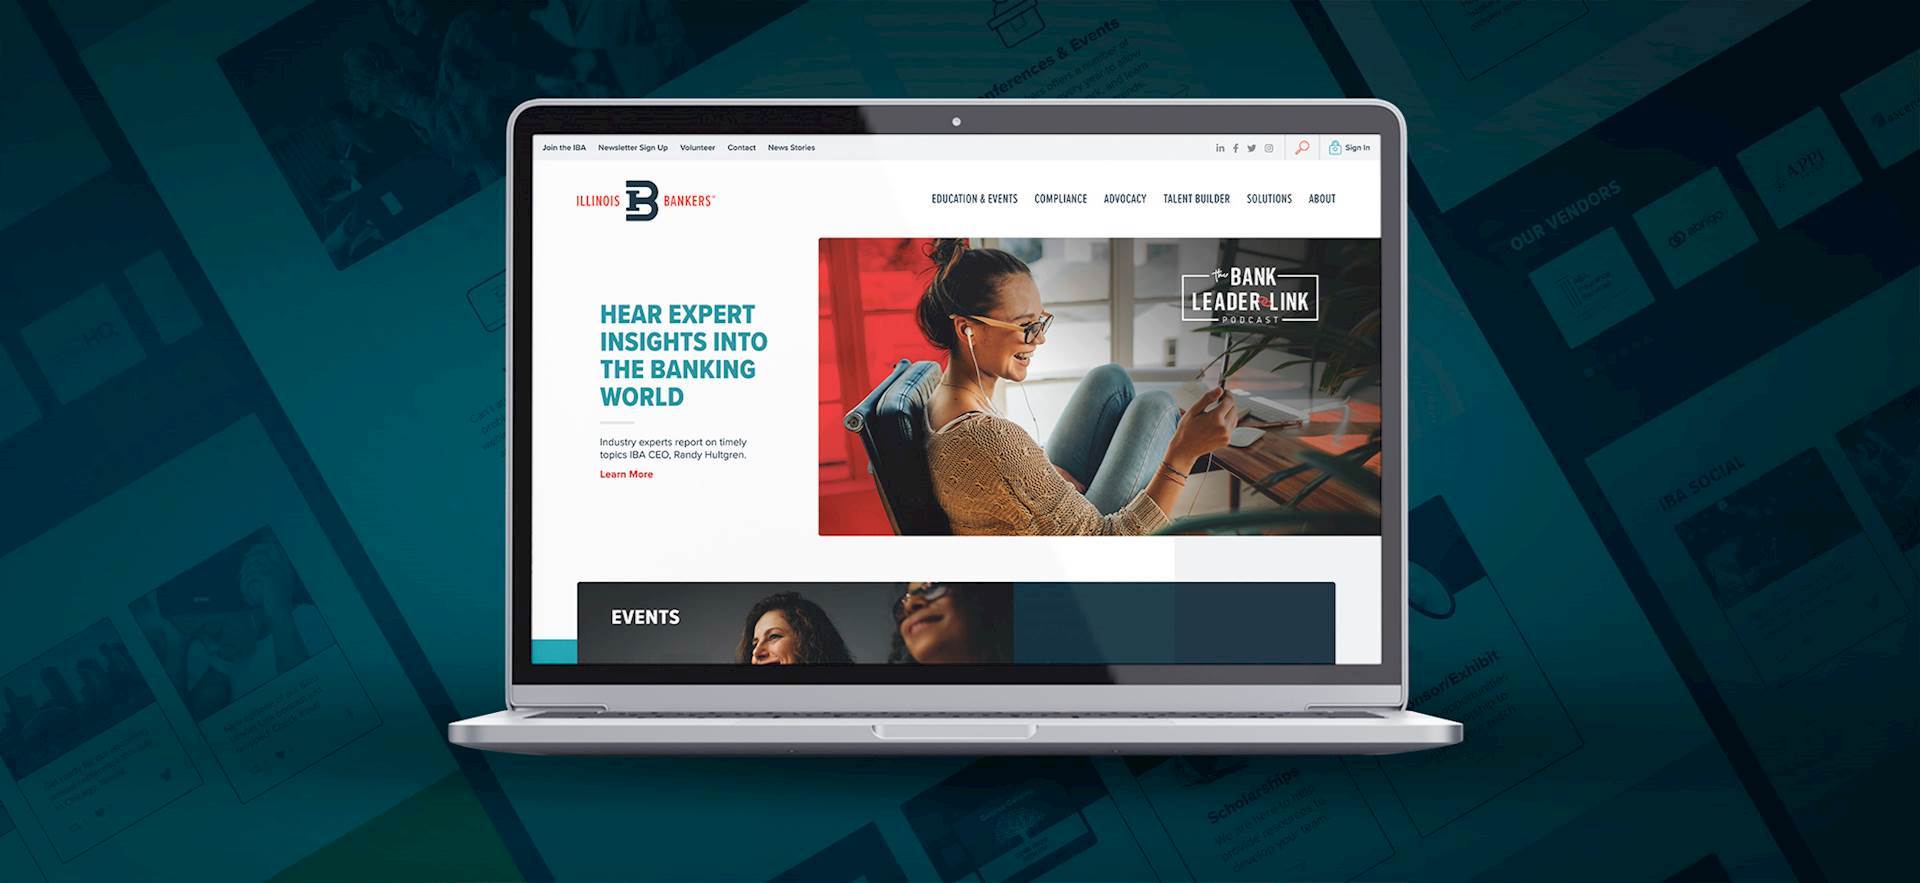 Read more about Redesigned Website Improves User Experience for Illinois Bankers blog post